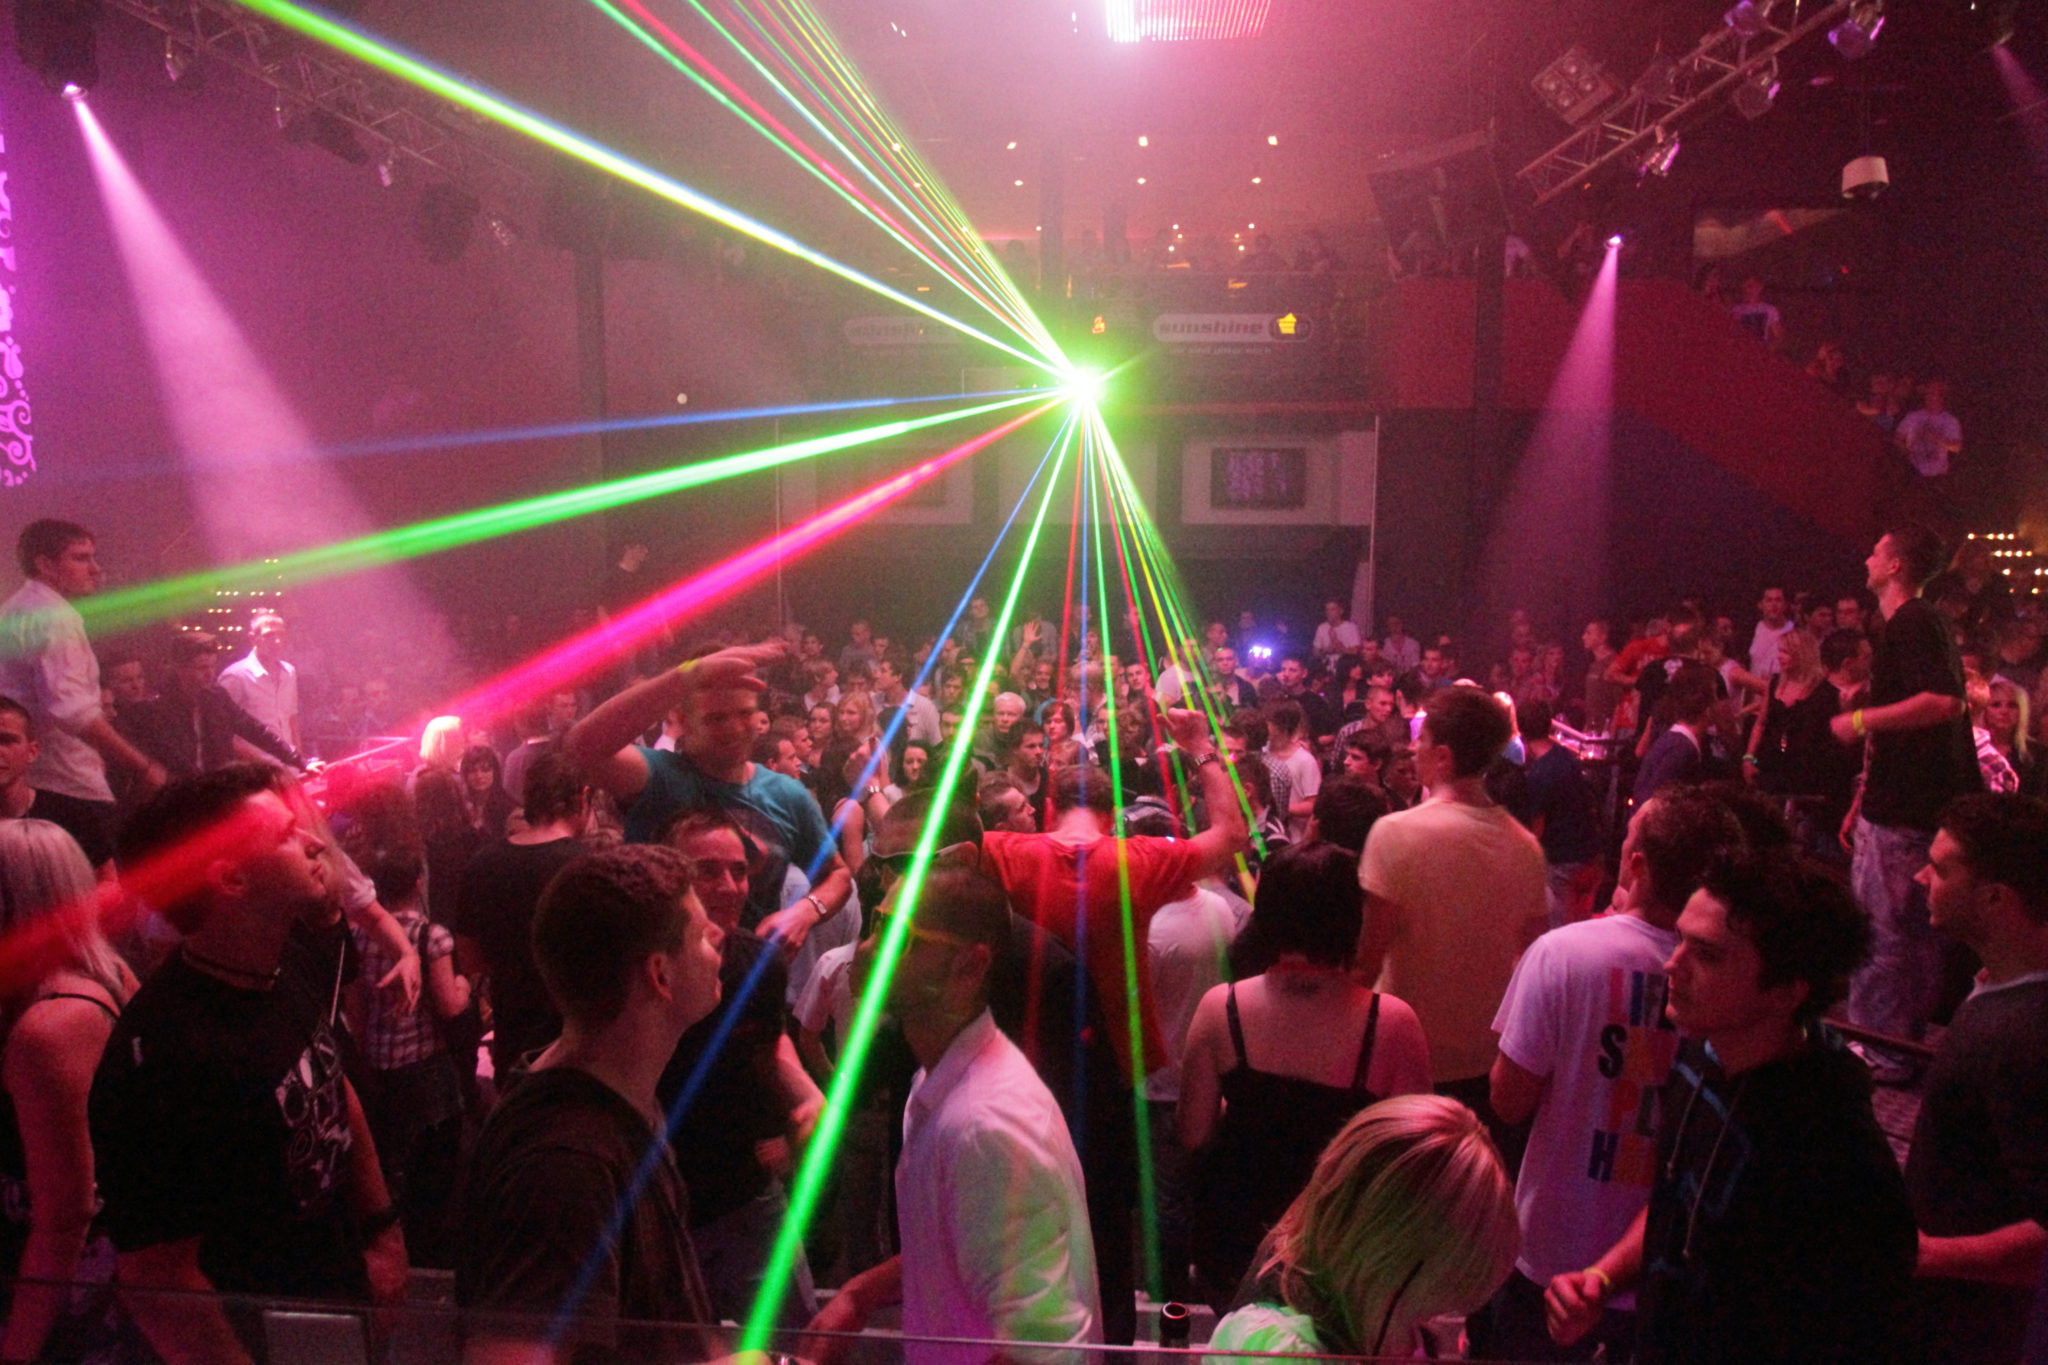 A laser show at a nightclub in Germany